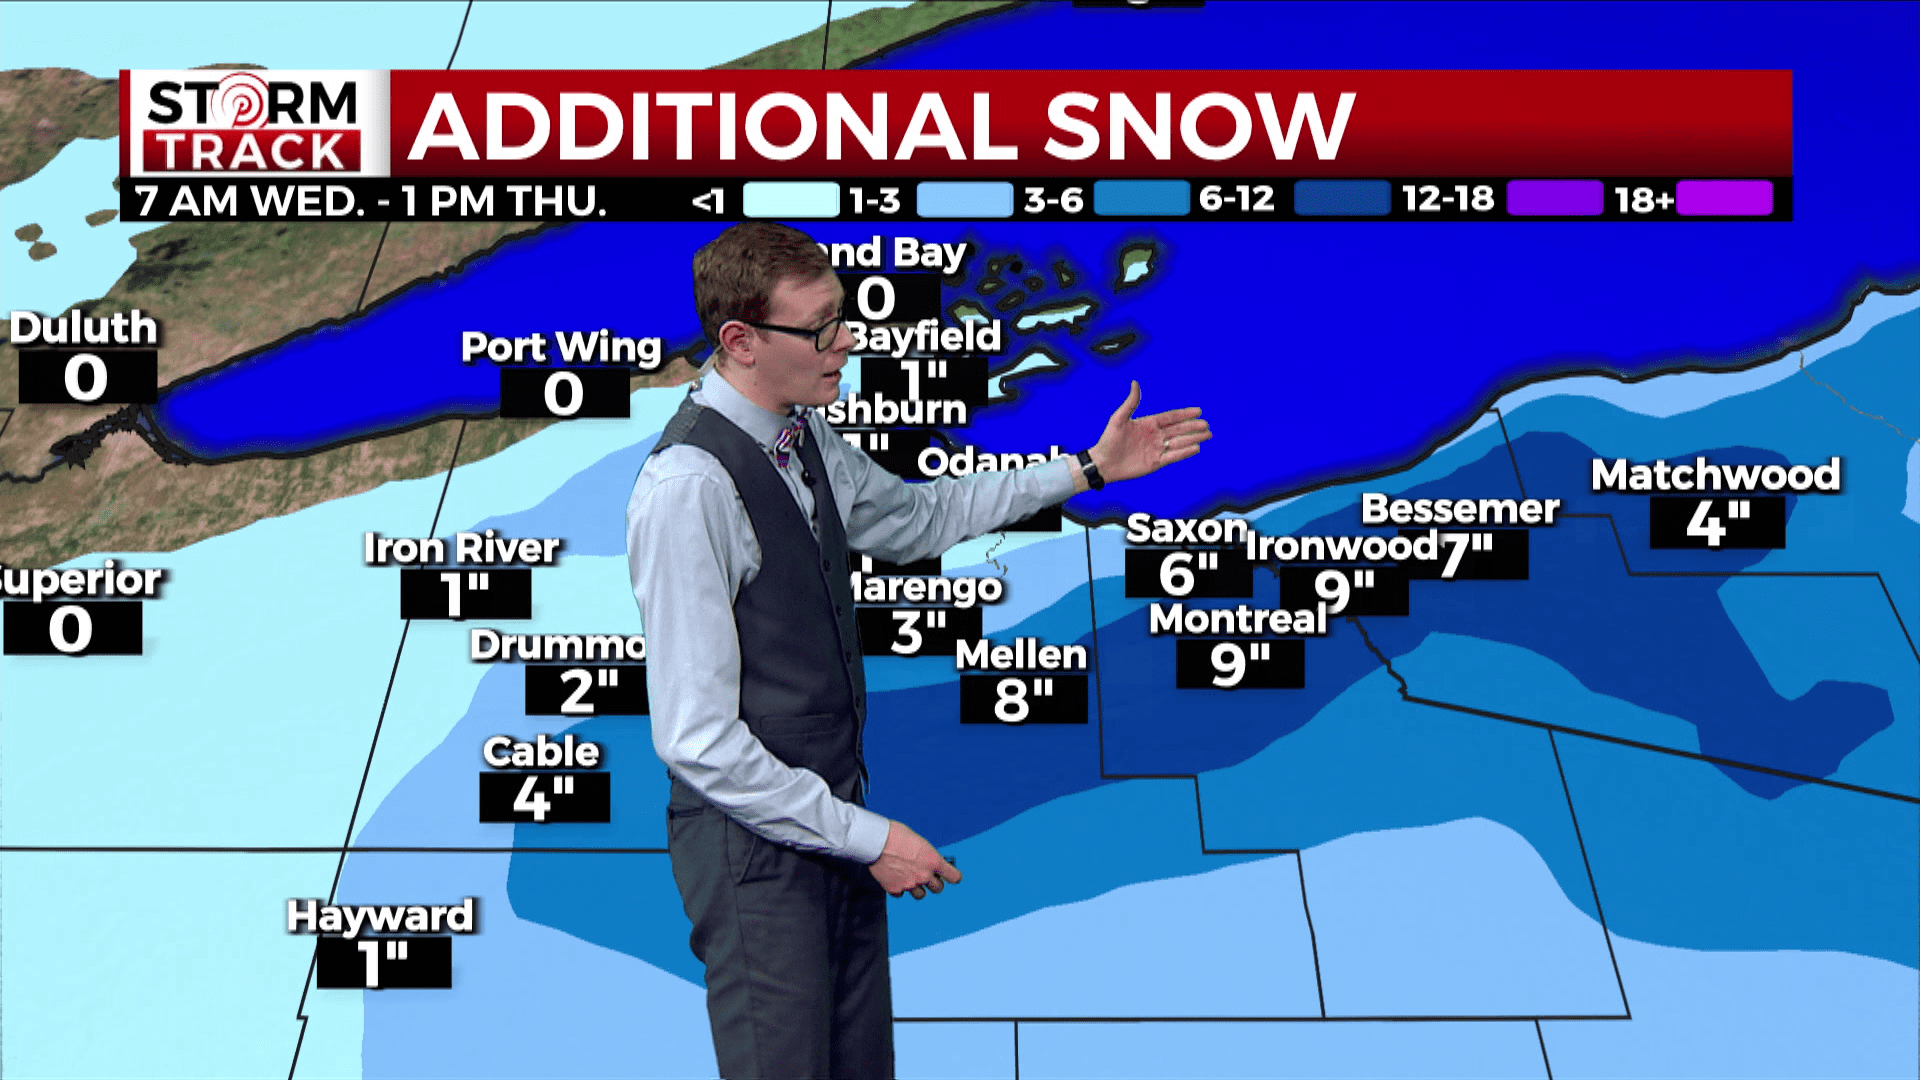 Brandon showing expected snow